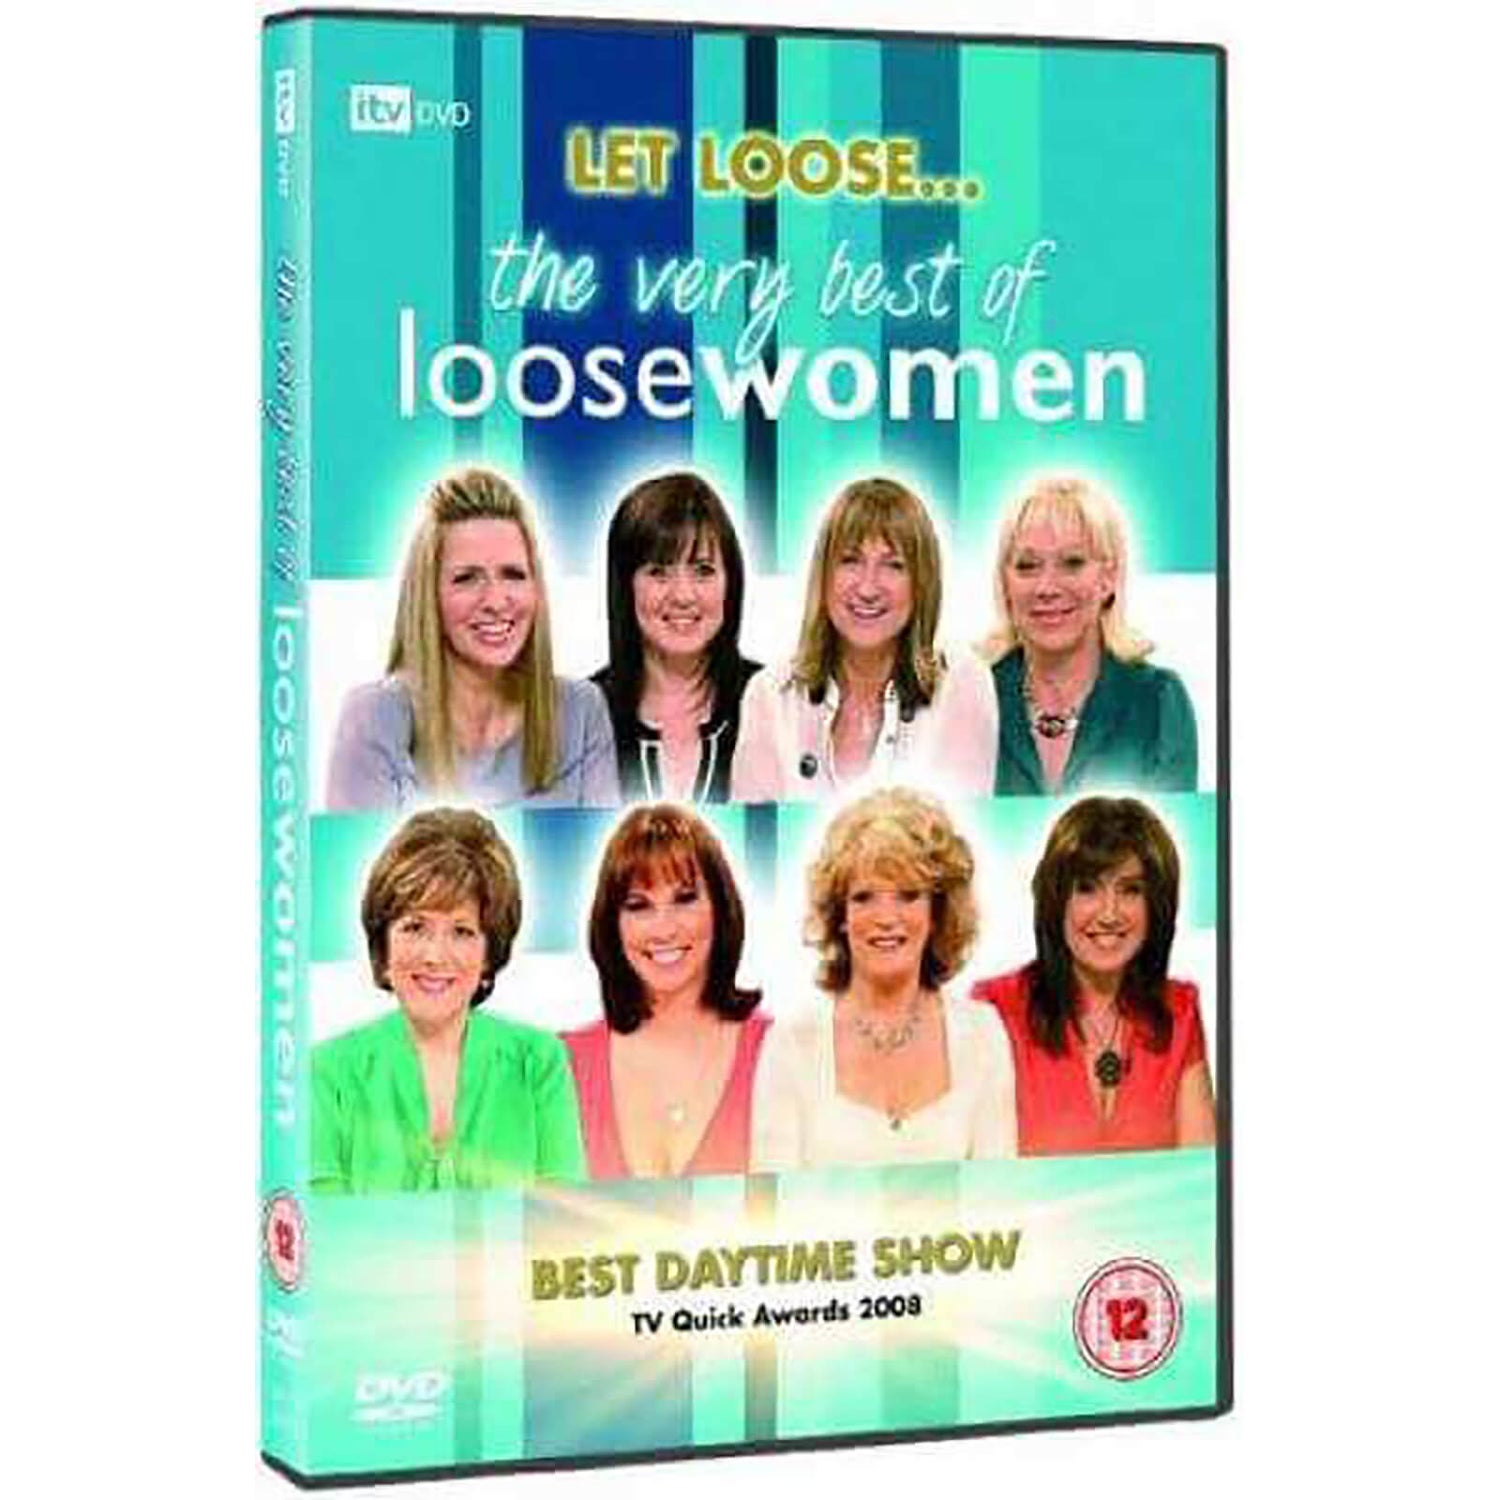 Let Loose - The Very Best Of Loose Women